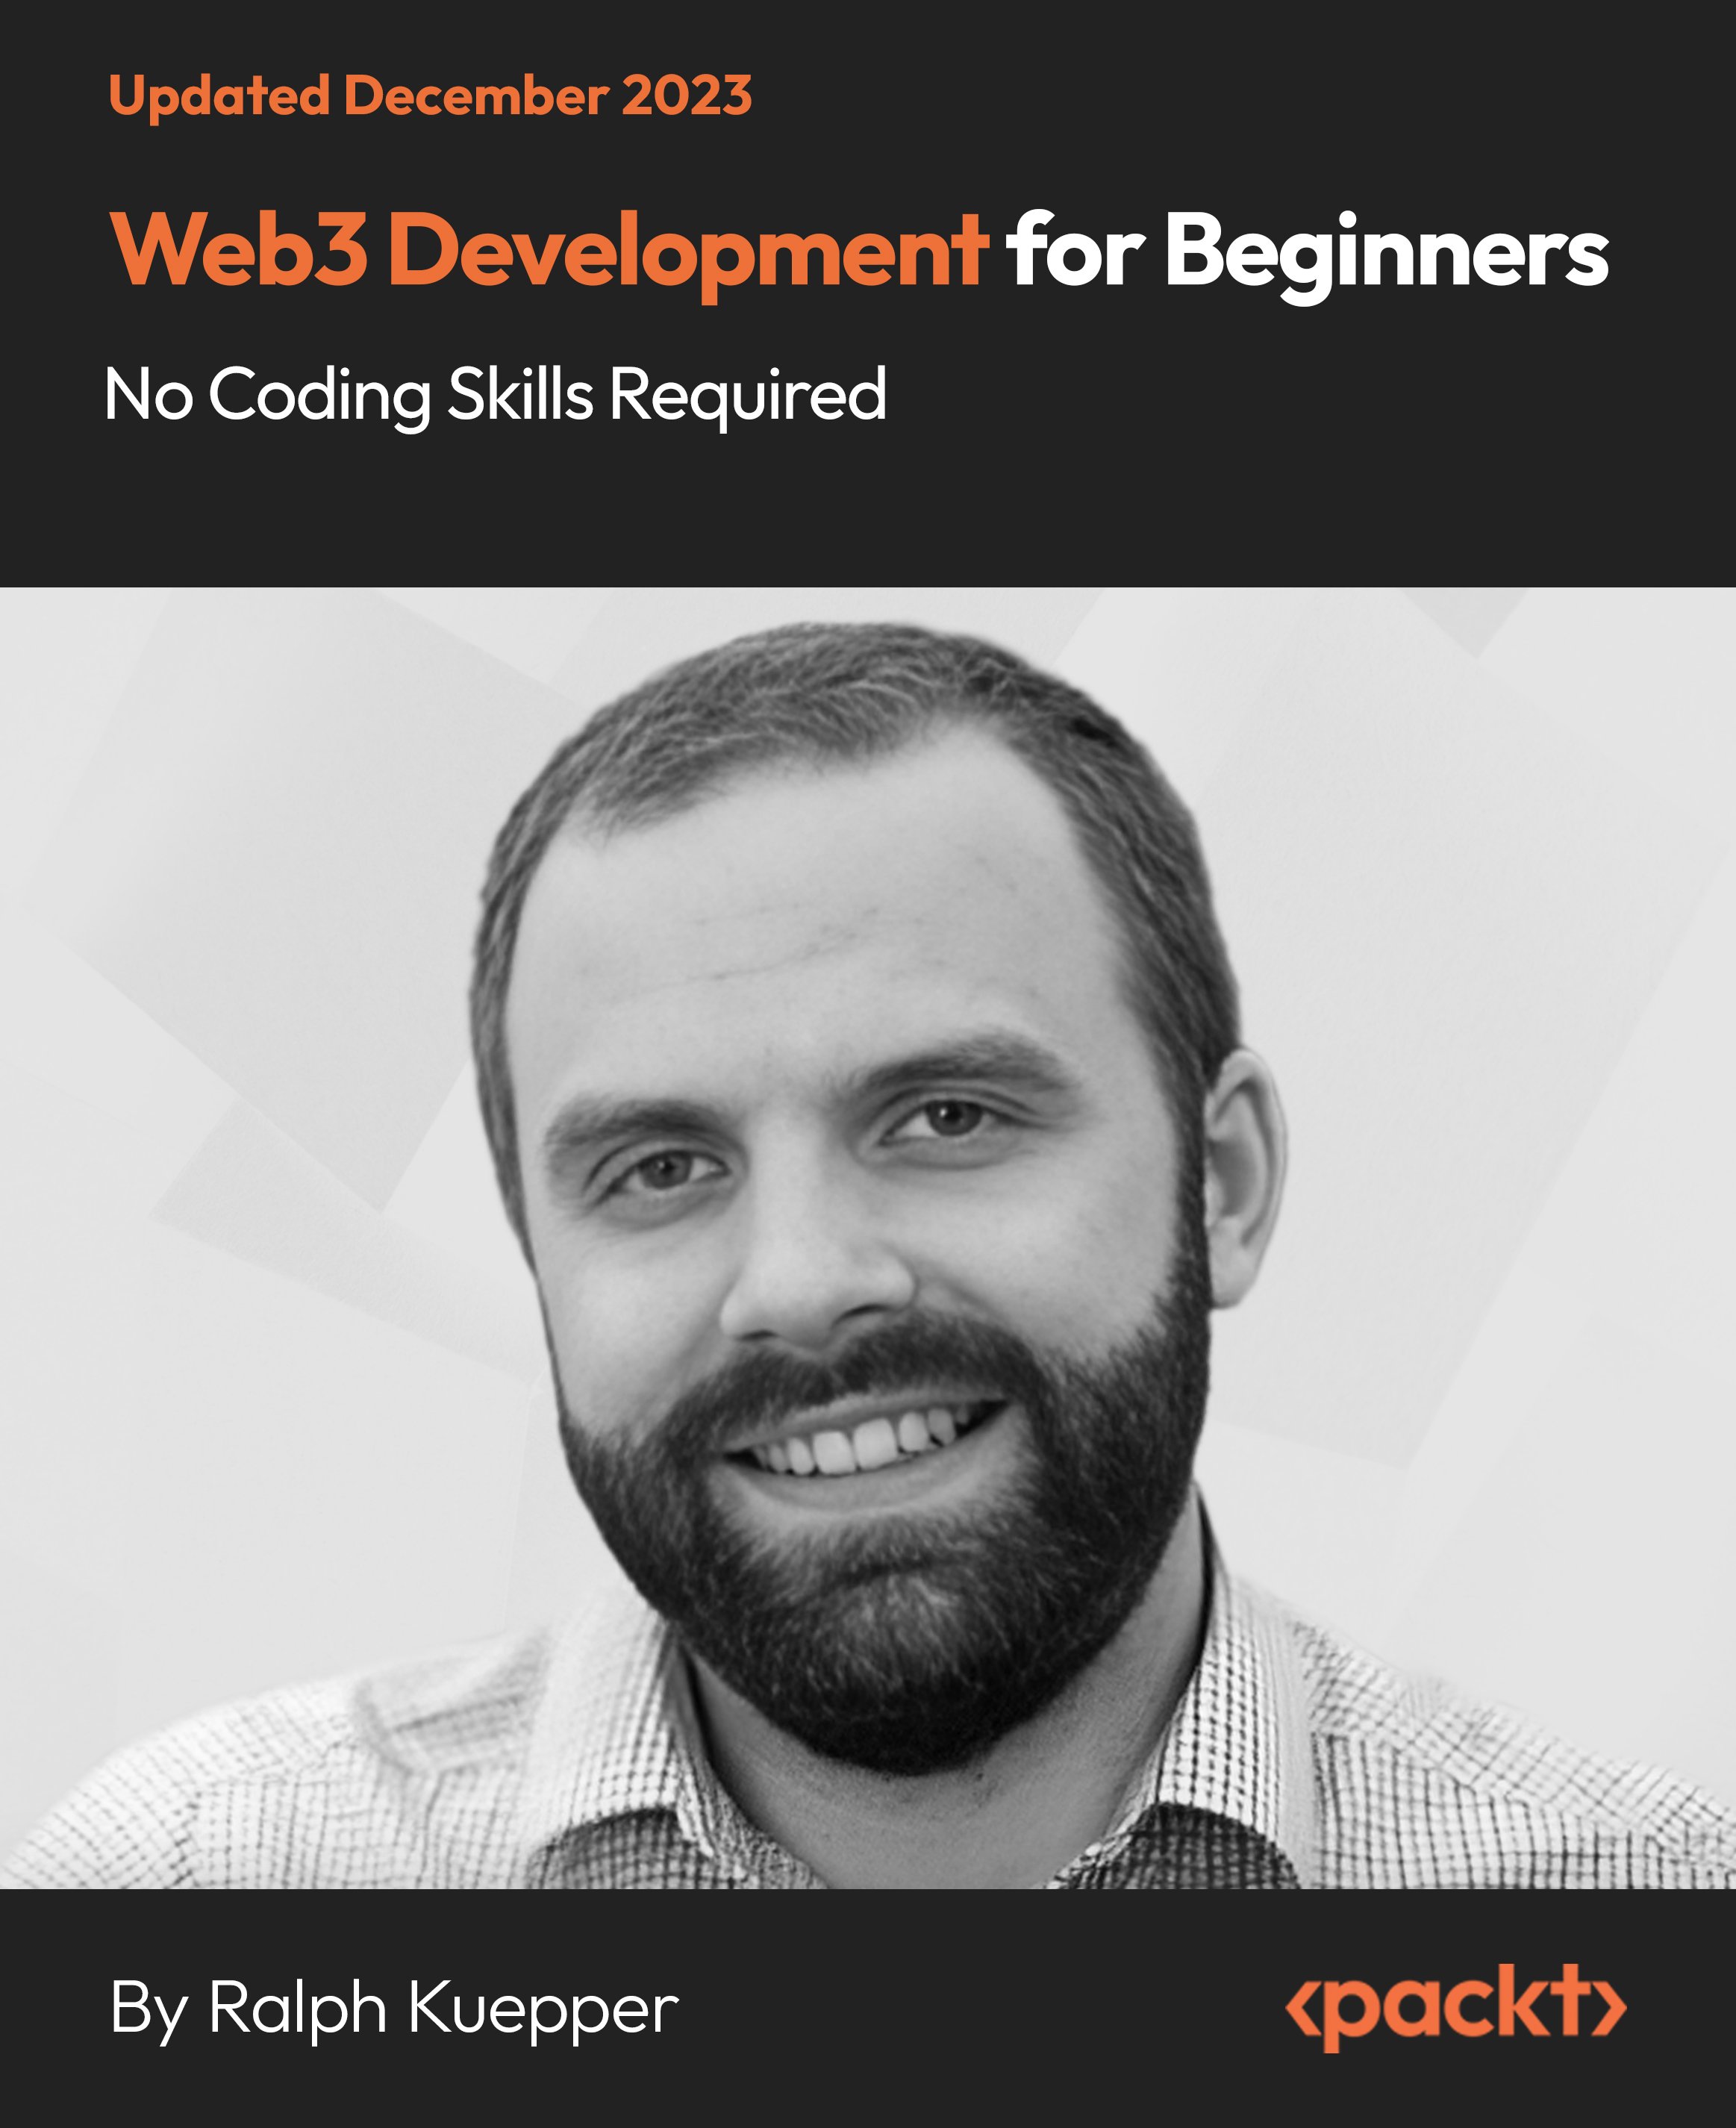 Web3 Development for Beginners - No Coding Skills Required